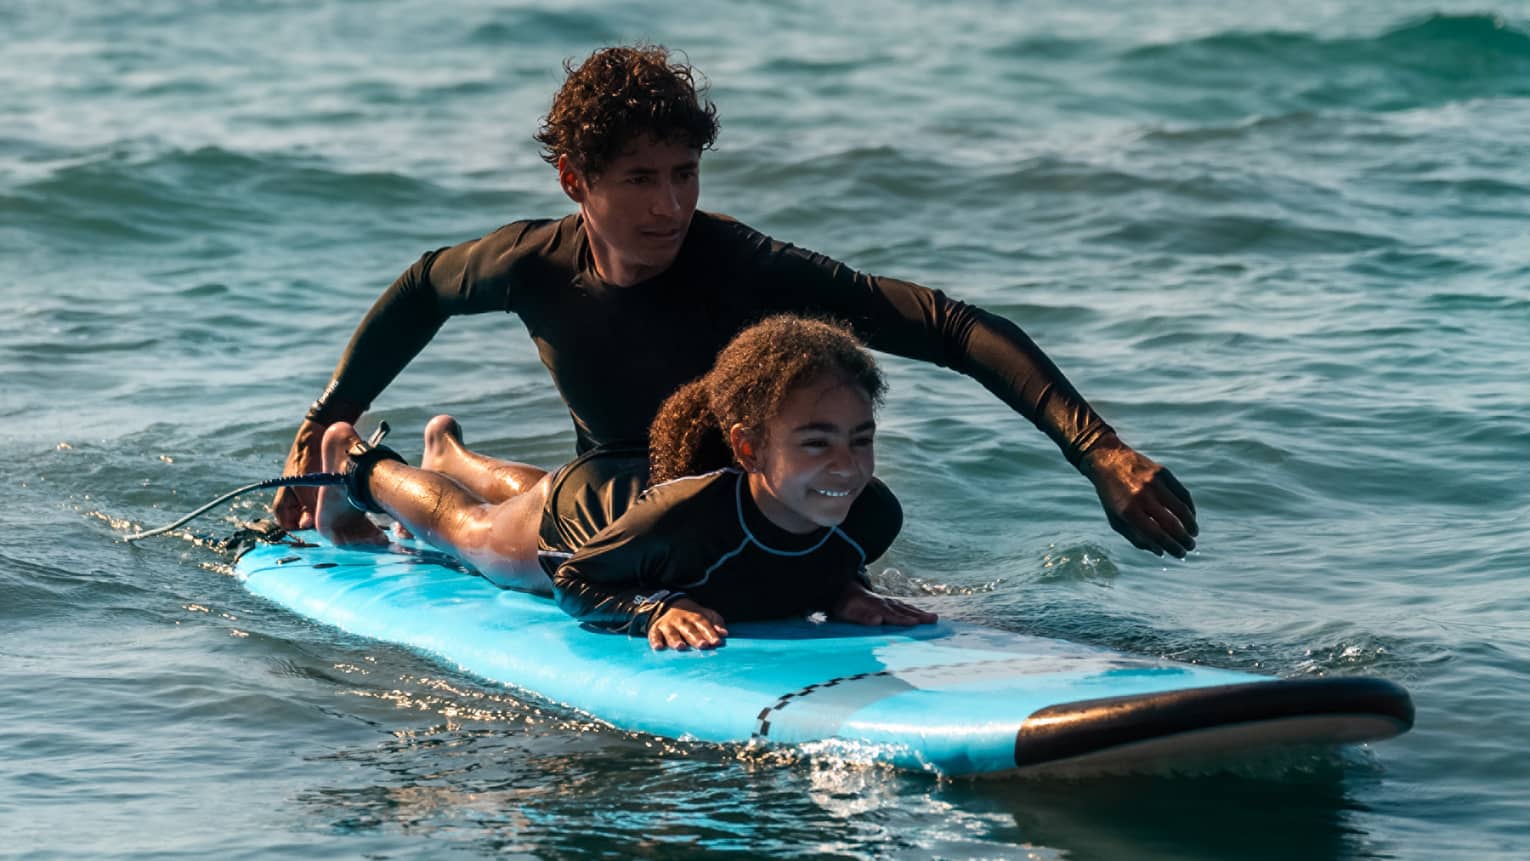 Male suf instructor wearing a black long-sleeve rashguard helps a young surfer paddle in the ocean